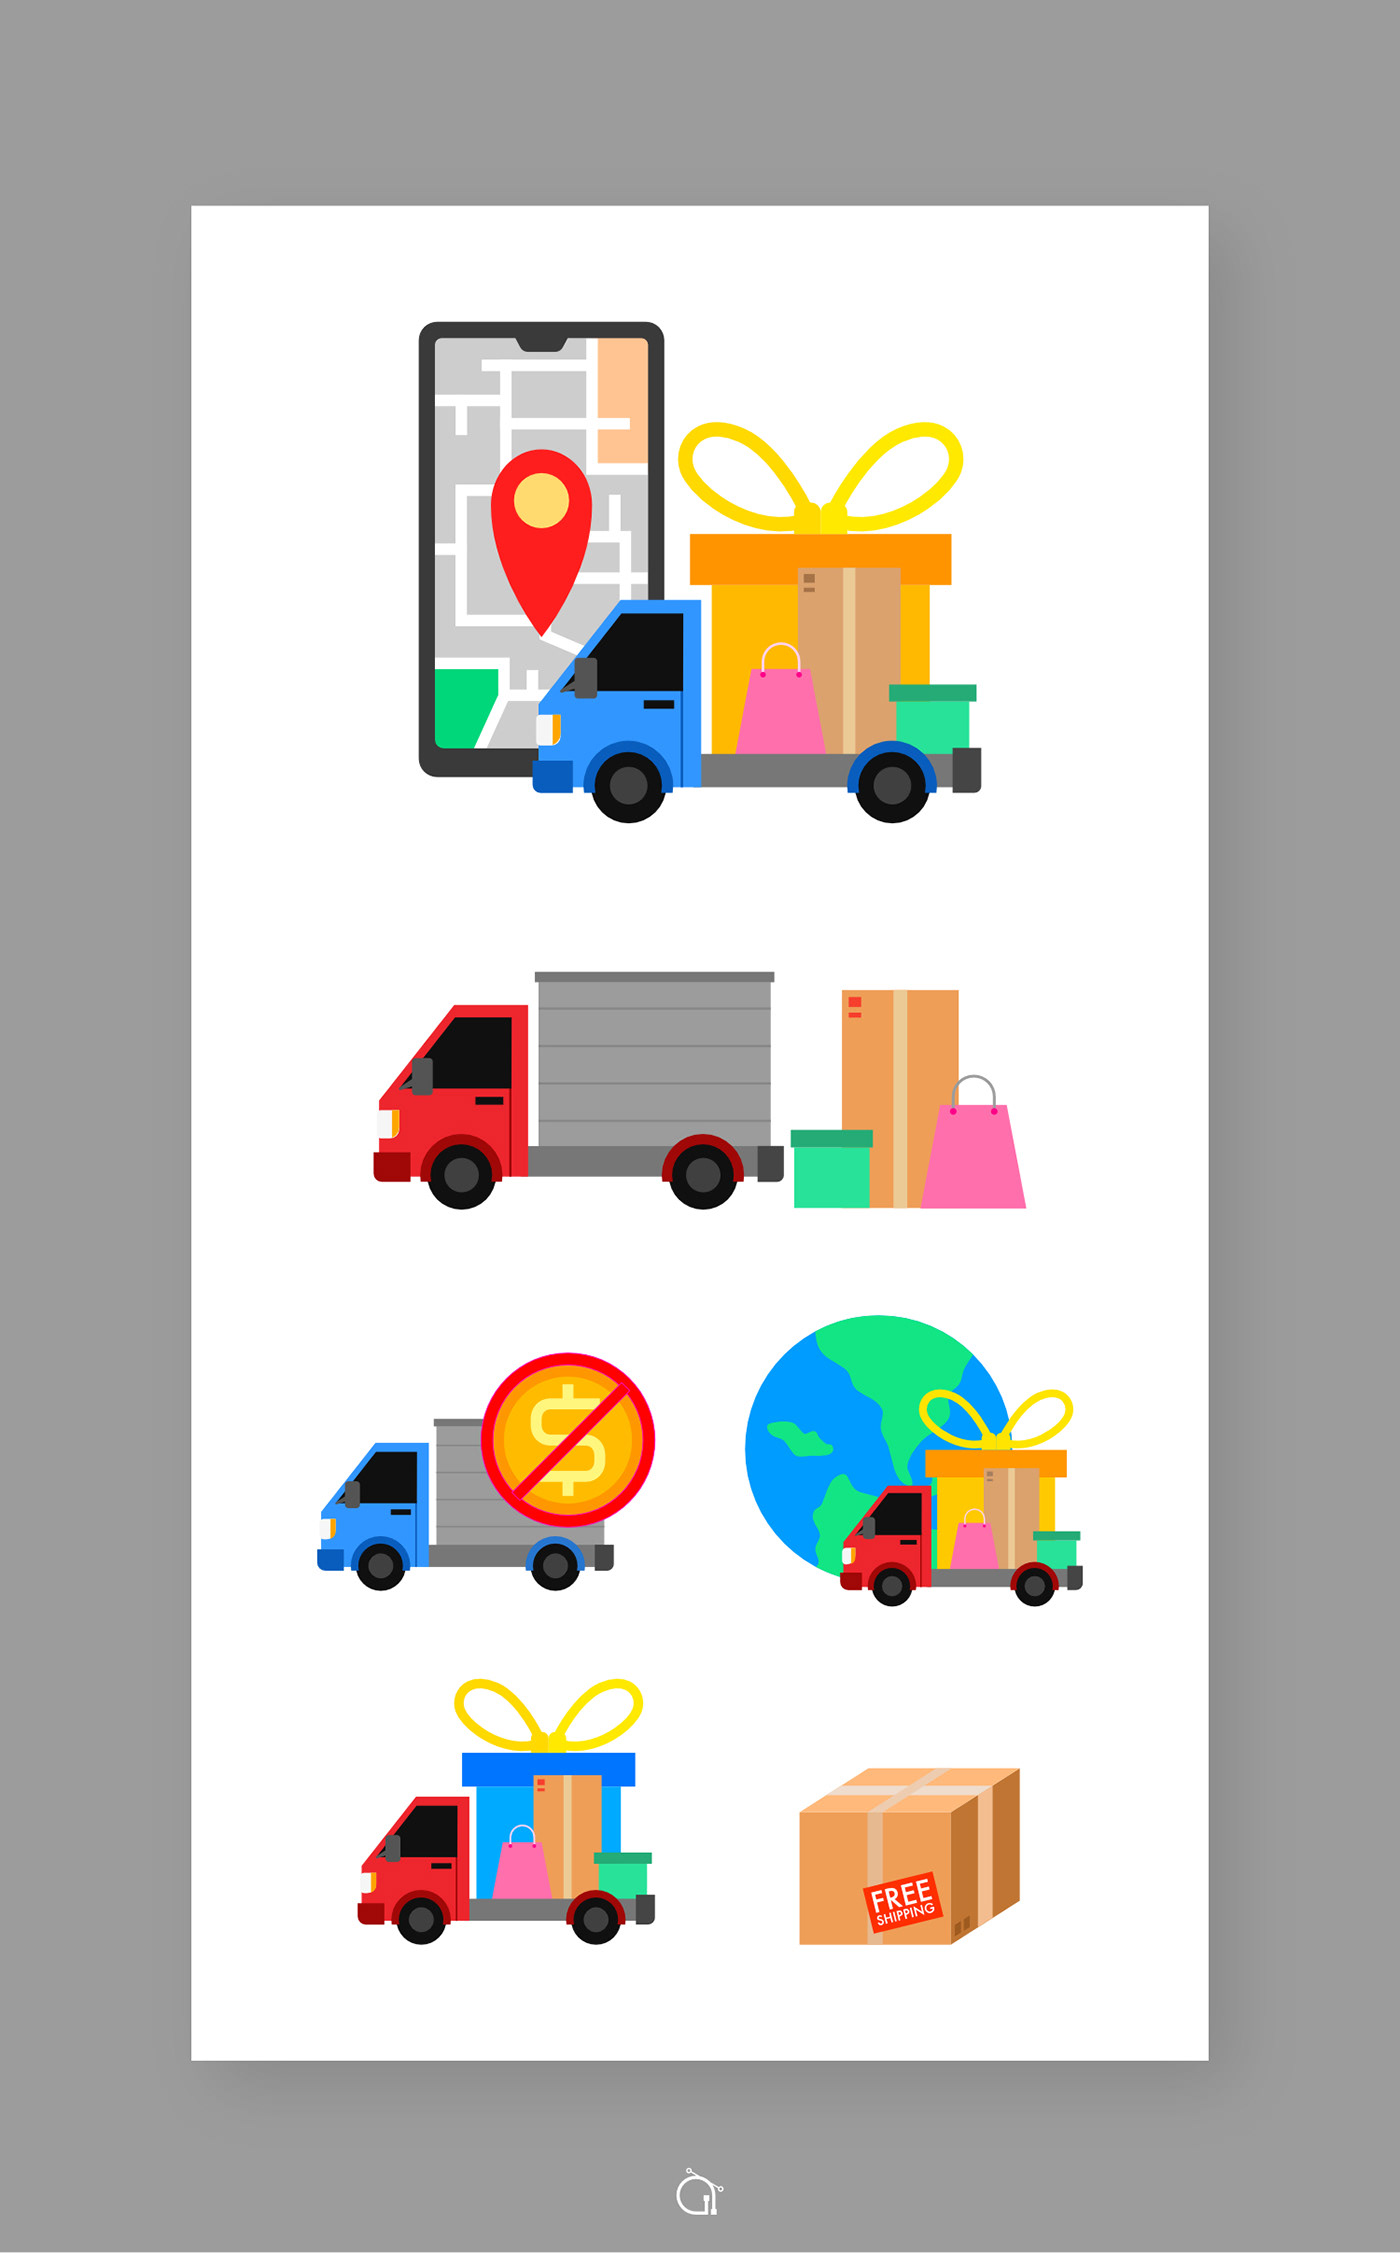 Free Delivery free shipping ILLUSTRATION  Marketplace online store shipment vector